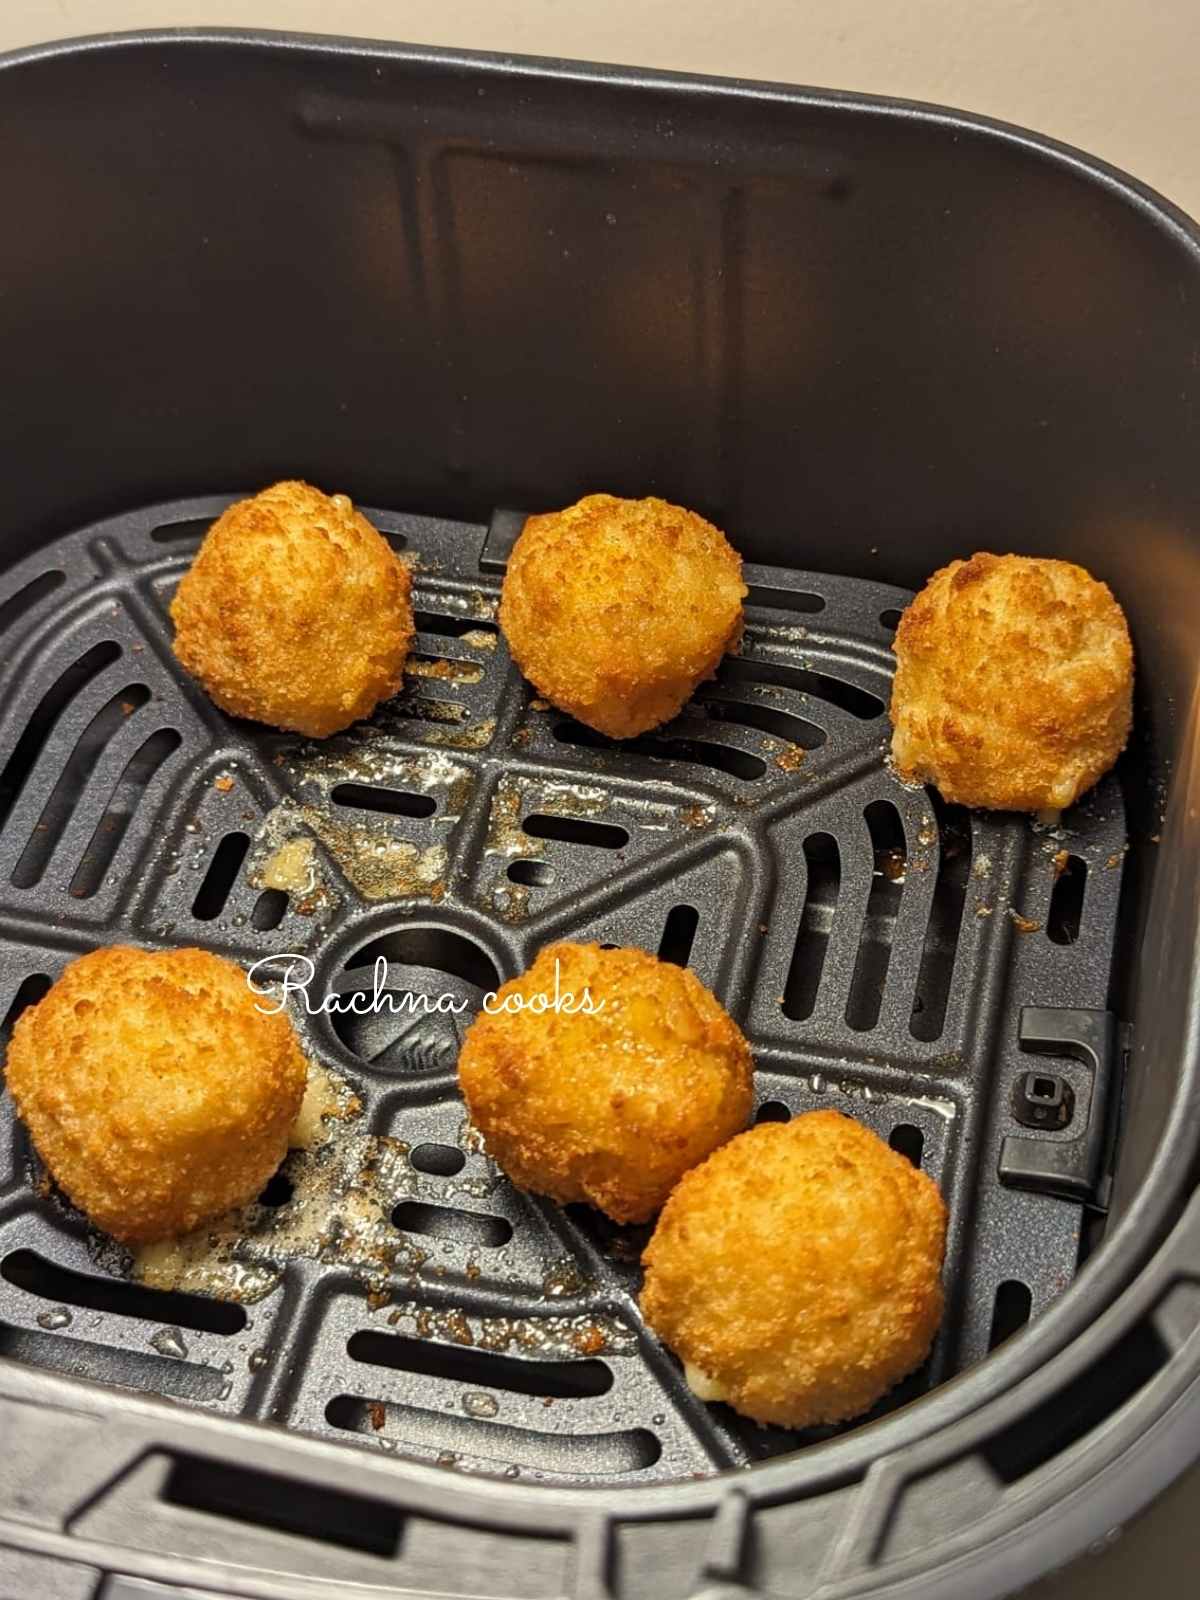 6 mac and cheese bites in air fryer basket.